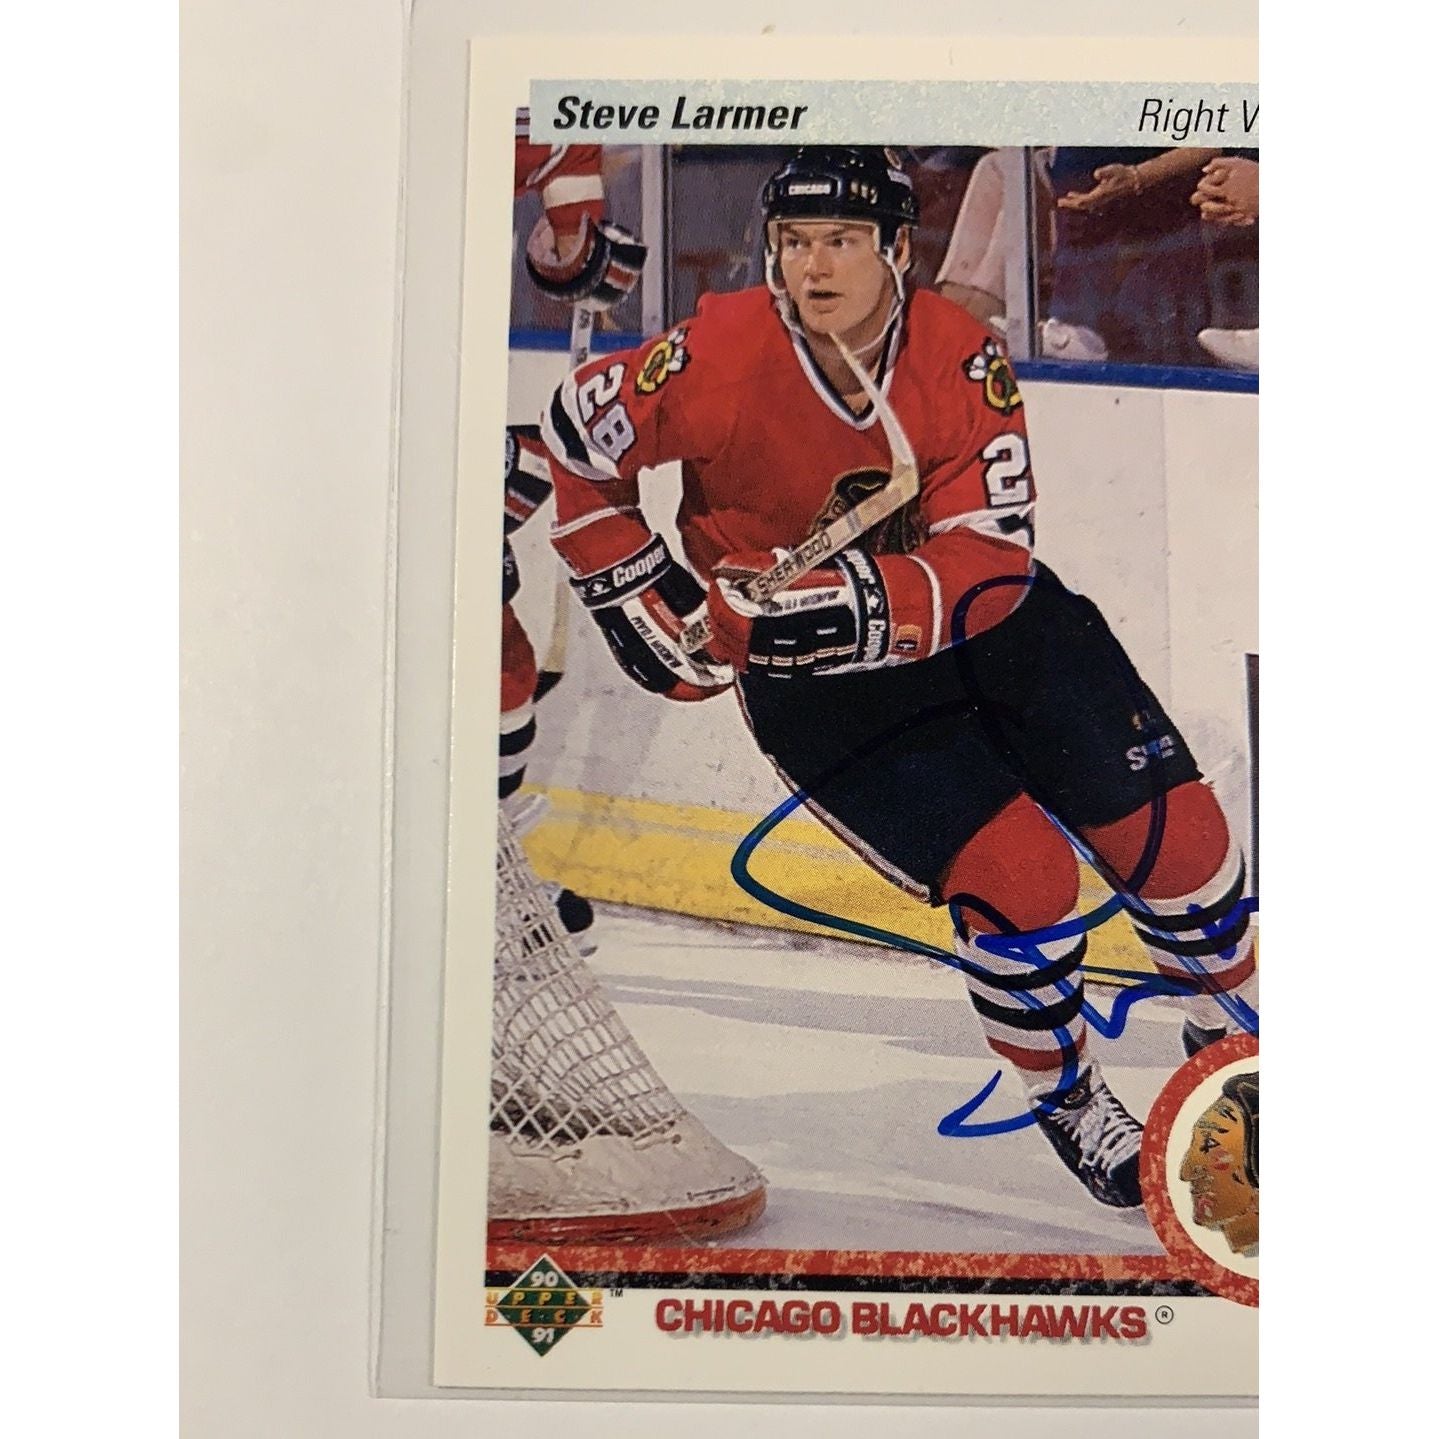  1990-91 Upper Deck Steve Larmer In Person Auto  Local Legends Cards & Collectibles